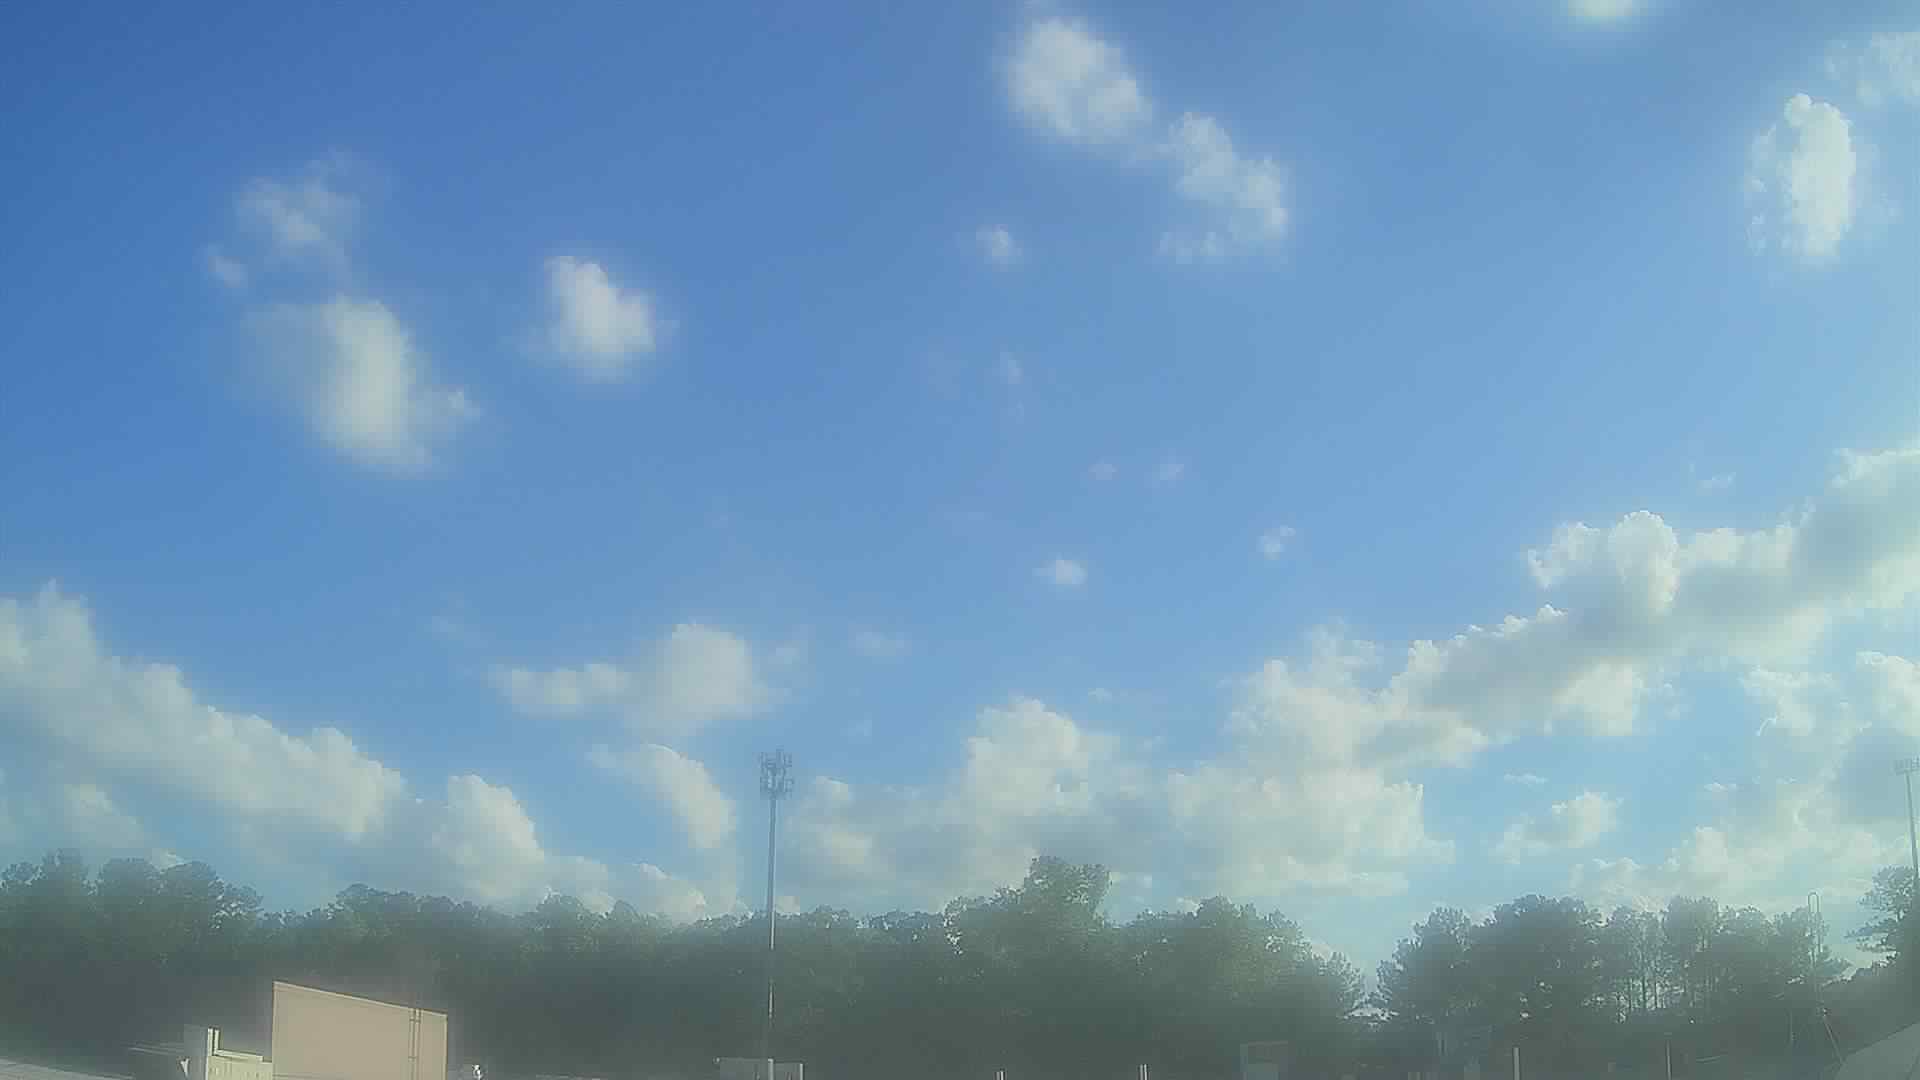  WeatherSTEM Cloud Camera MabryMSWxSTEM in Cobb County, Georgia GA at Mabry Middle School